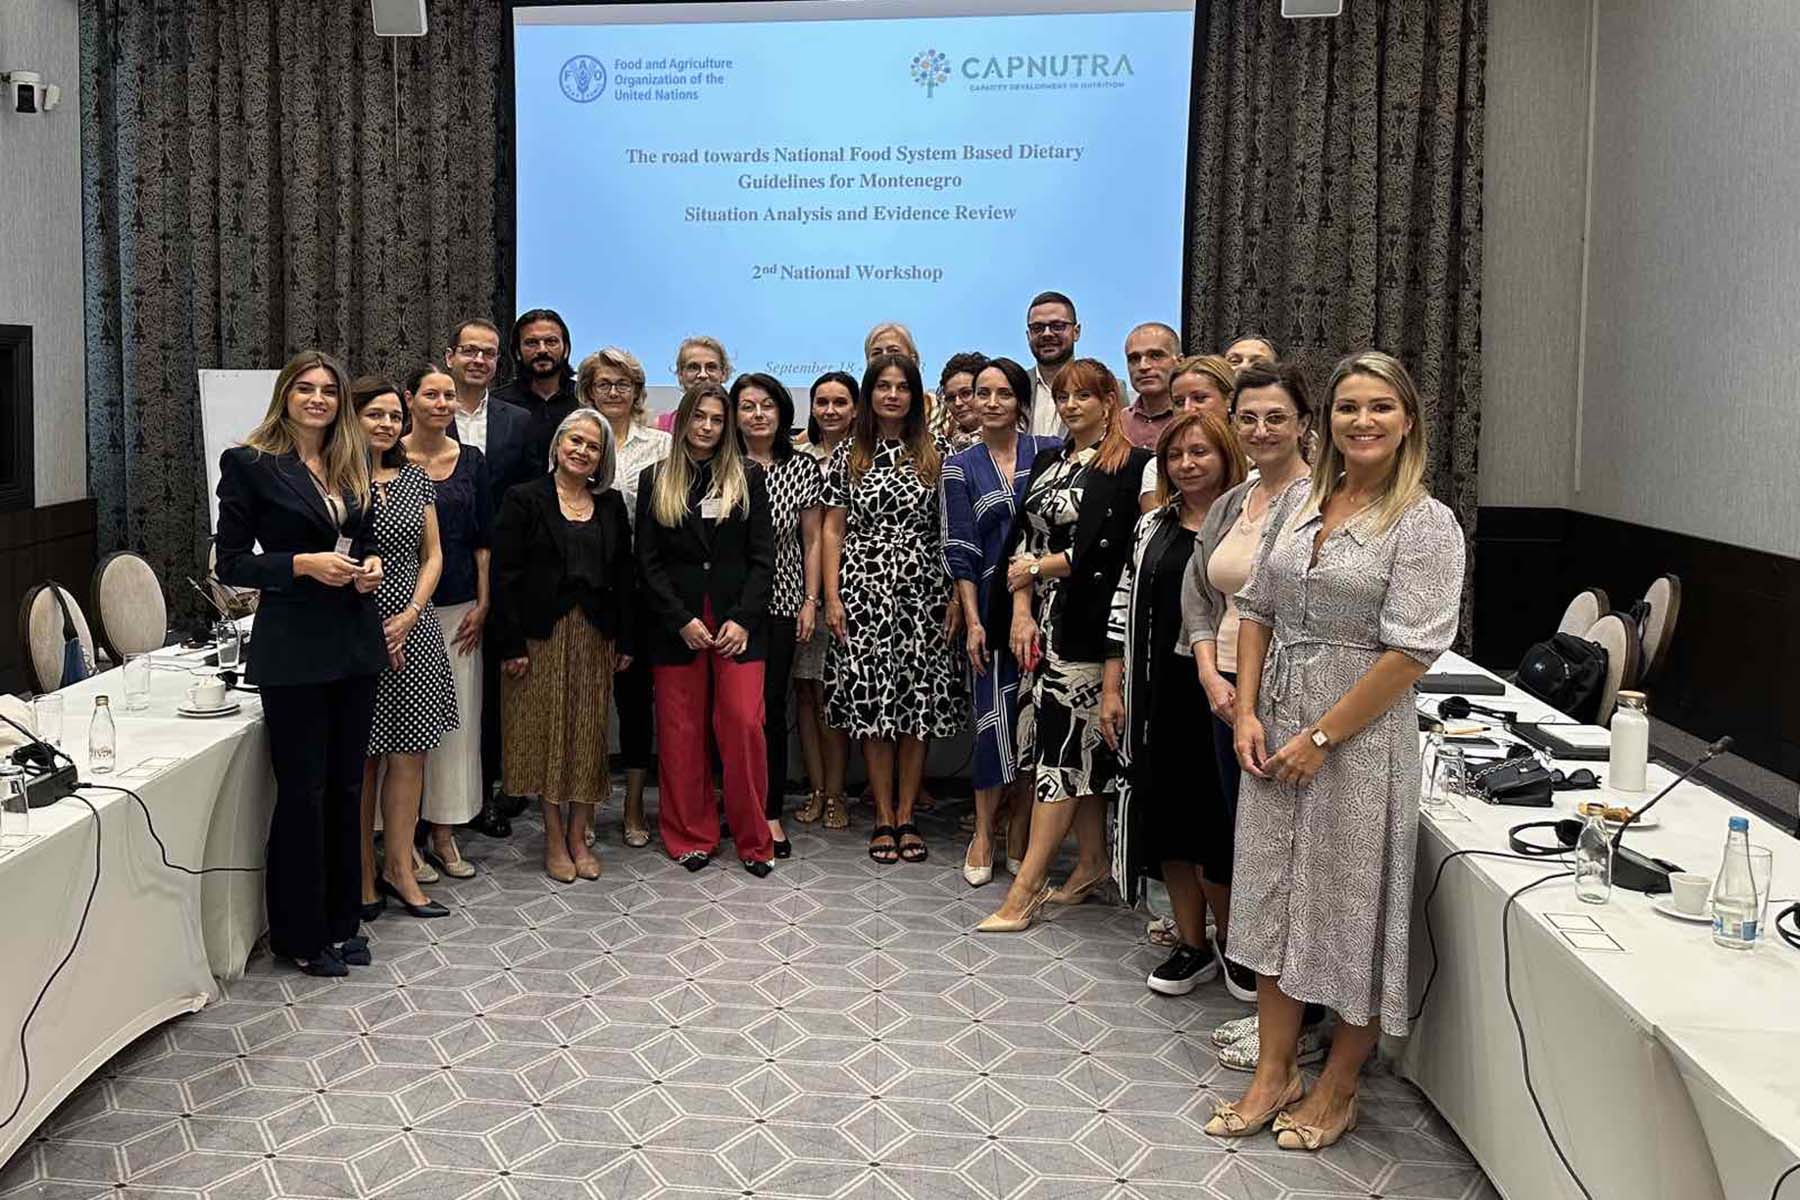 2nd Second National Workshop - The Road Towards National Food System Based Dietary Guidelines for Montenegro- Situation Analysis and Evidence Review 18th-19th September 2023 Podgorica, Montenegro
Agenda EngAgenda
ObjectivesCiljevi